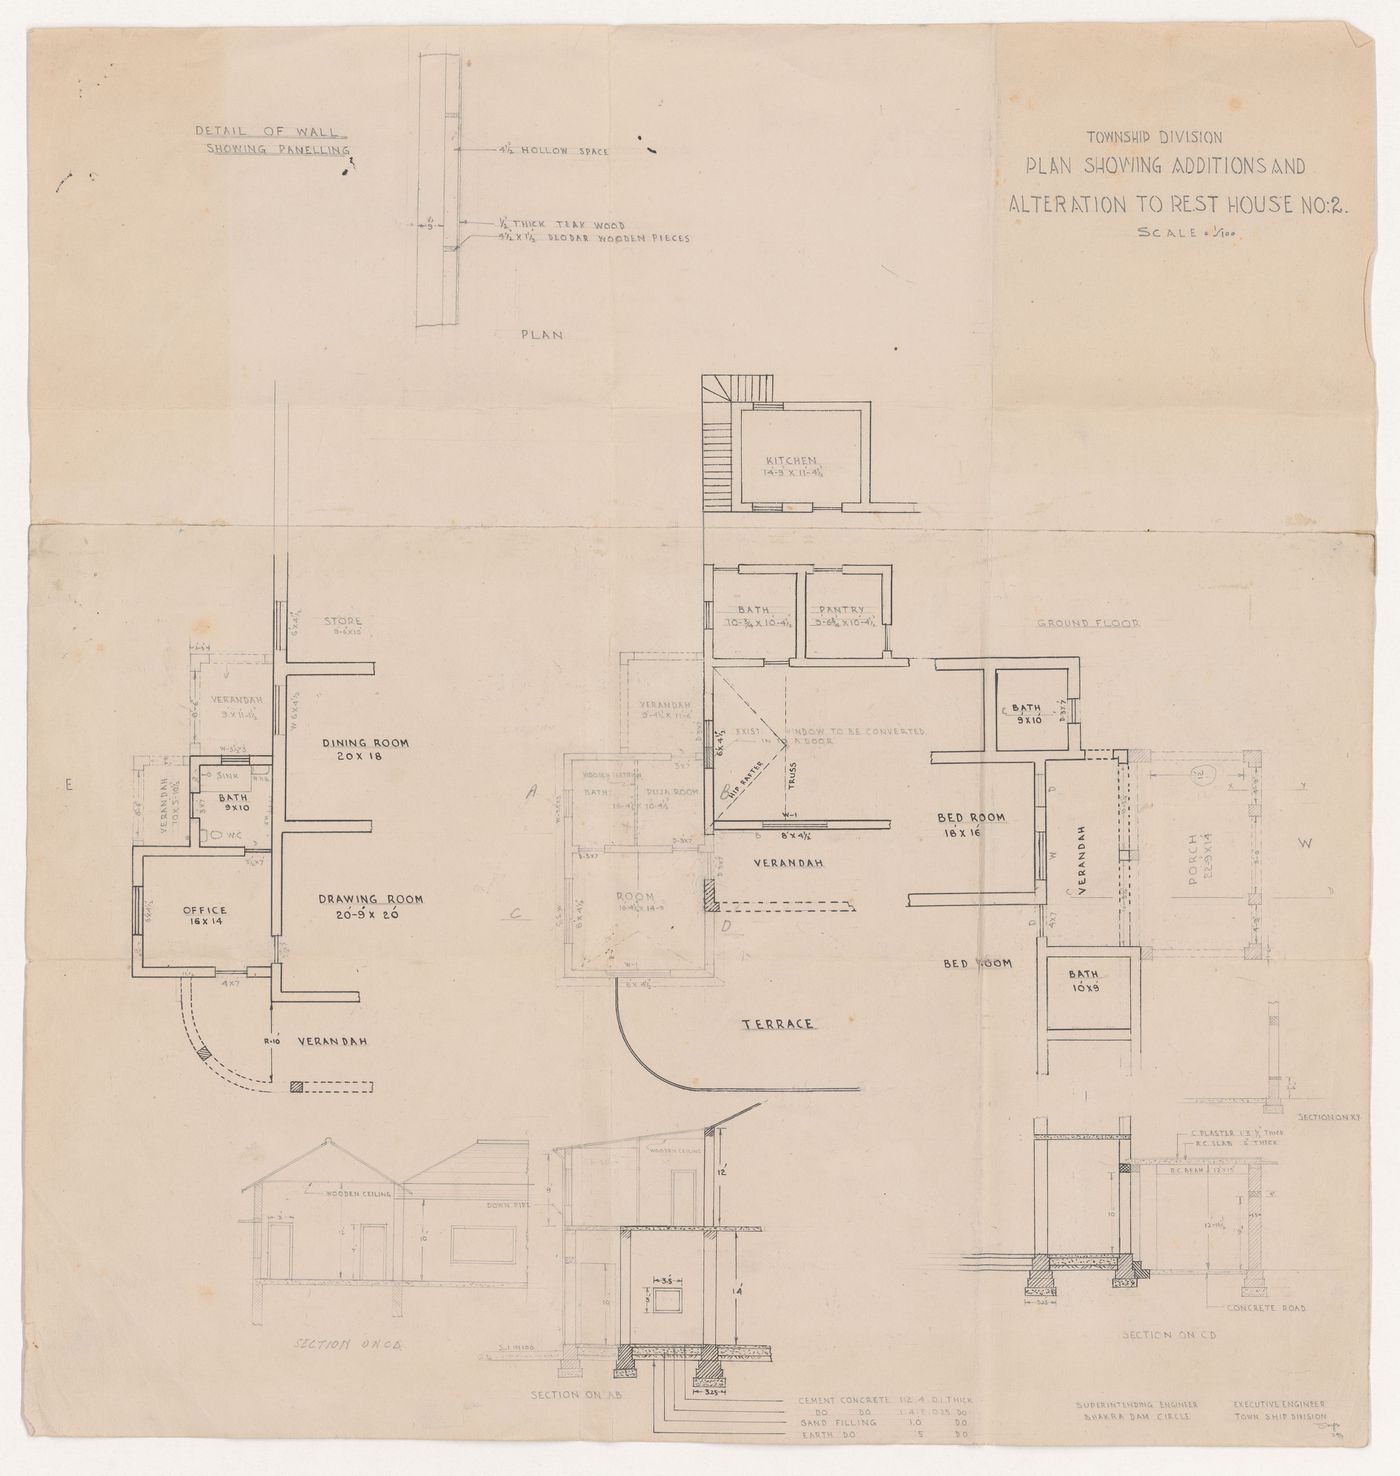 Plans, sections, and detail for Rest houses, Bhakra-Nangal Project, Talwara, India